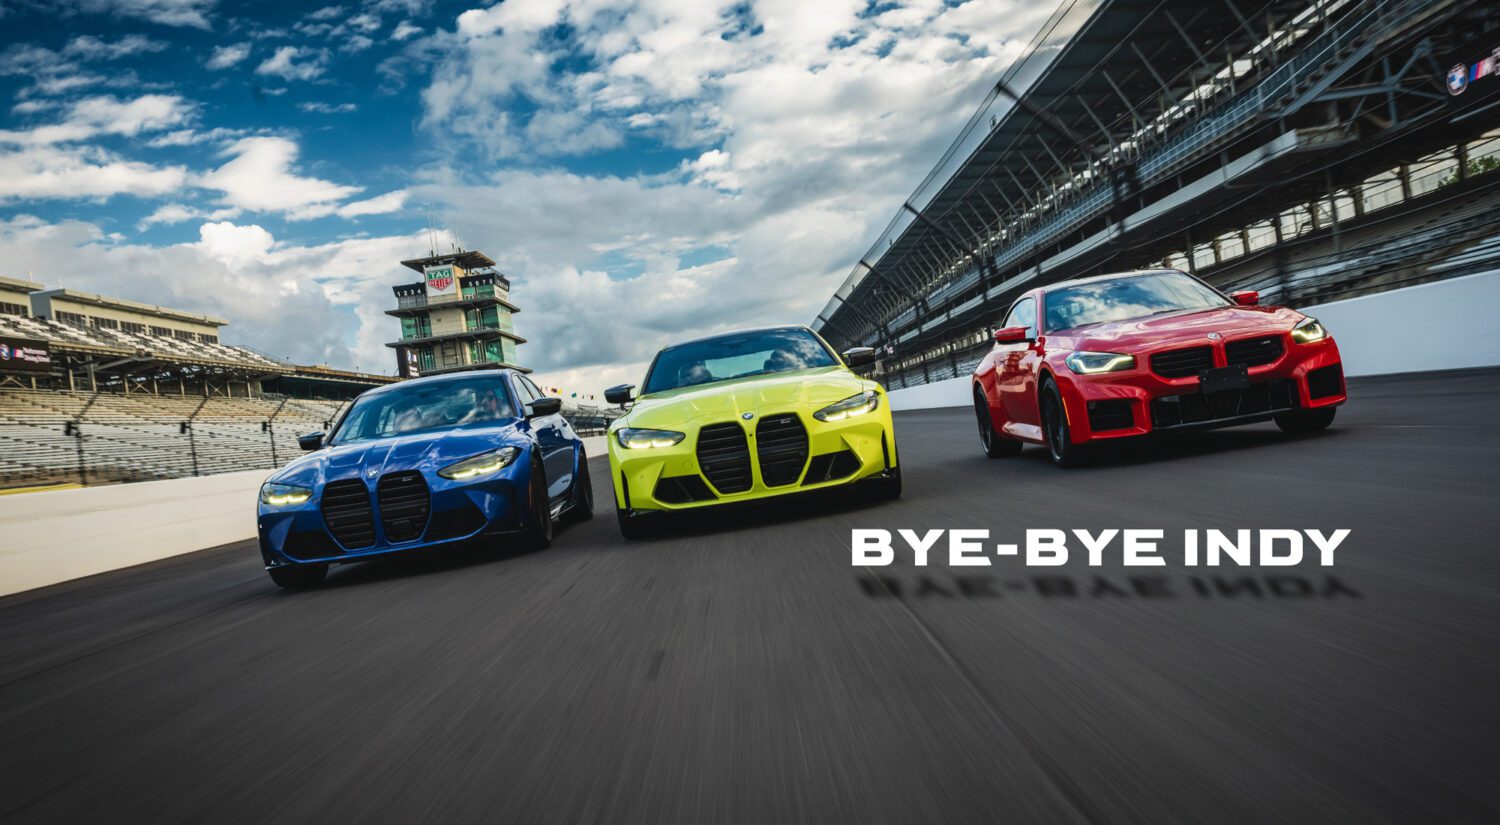 This could be your last chance to drive a BMW at Indy